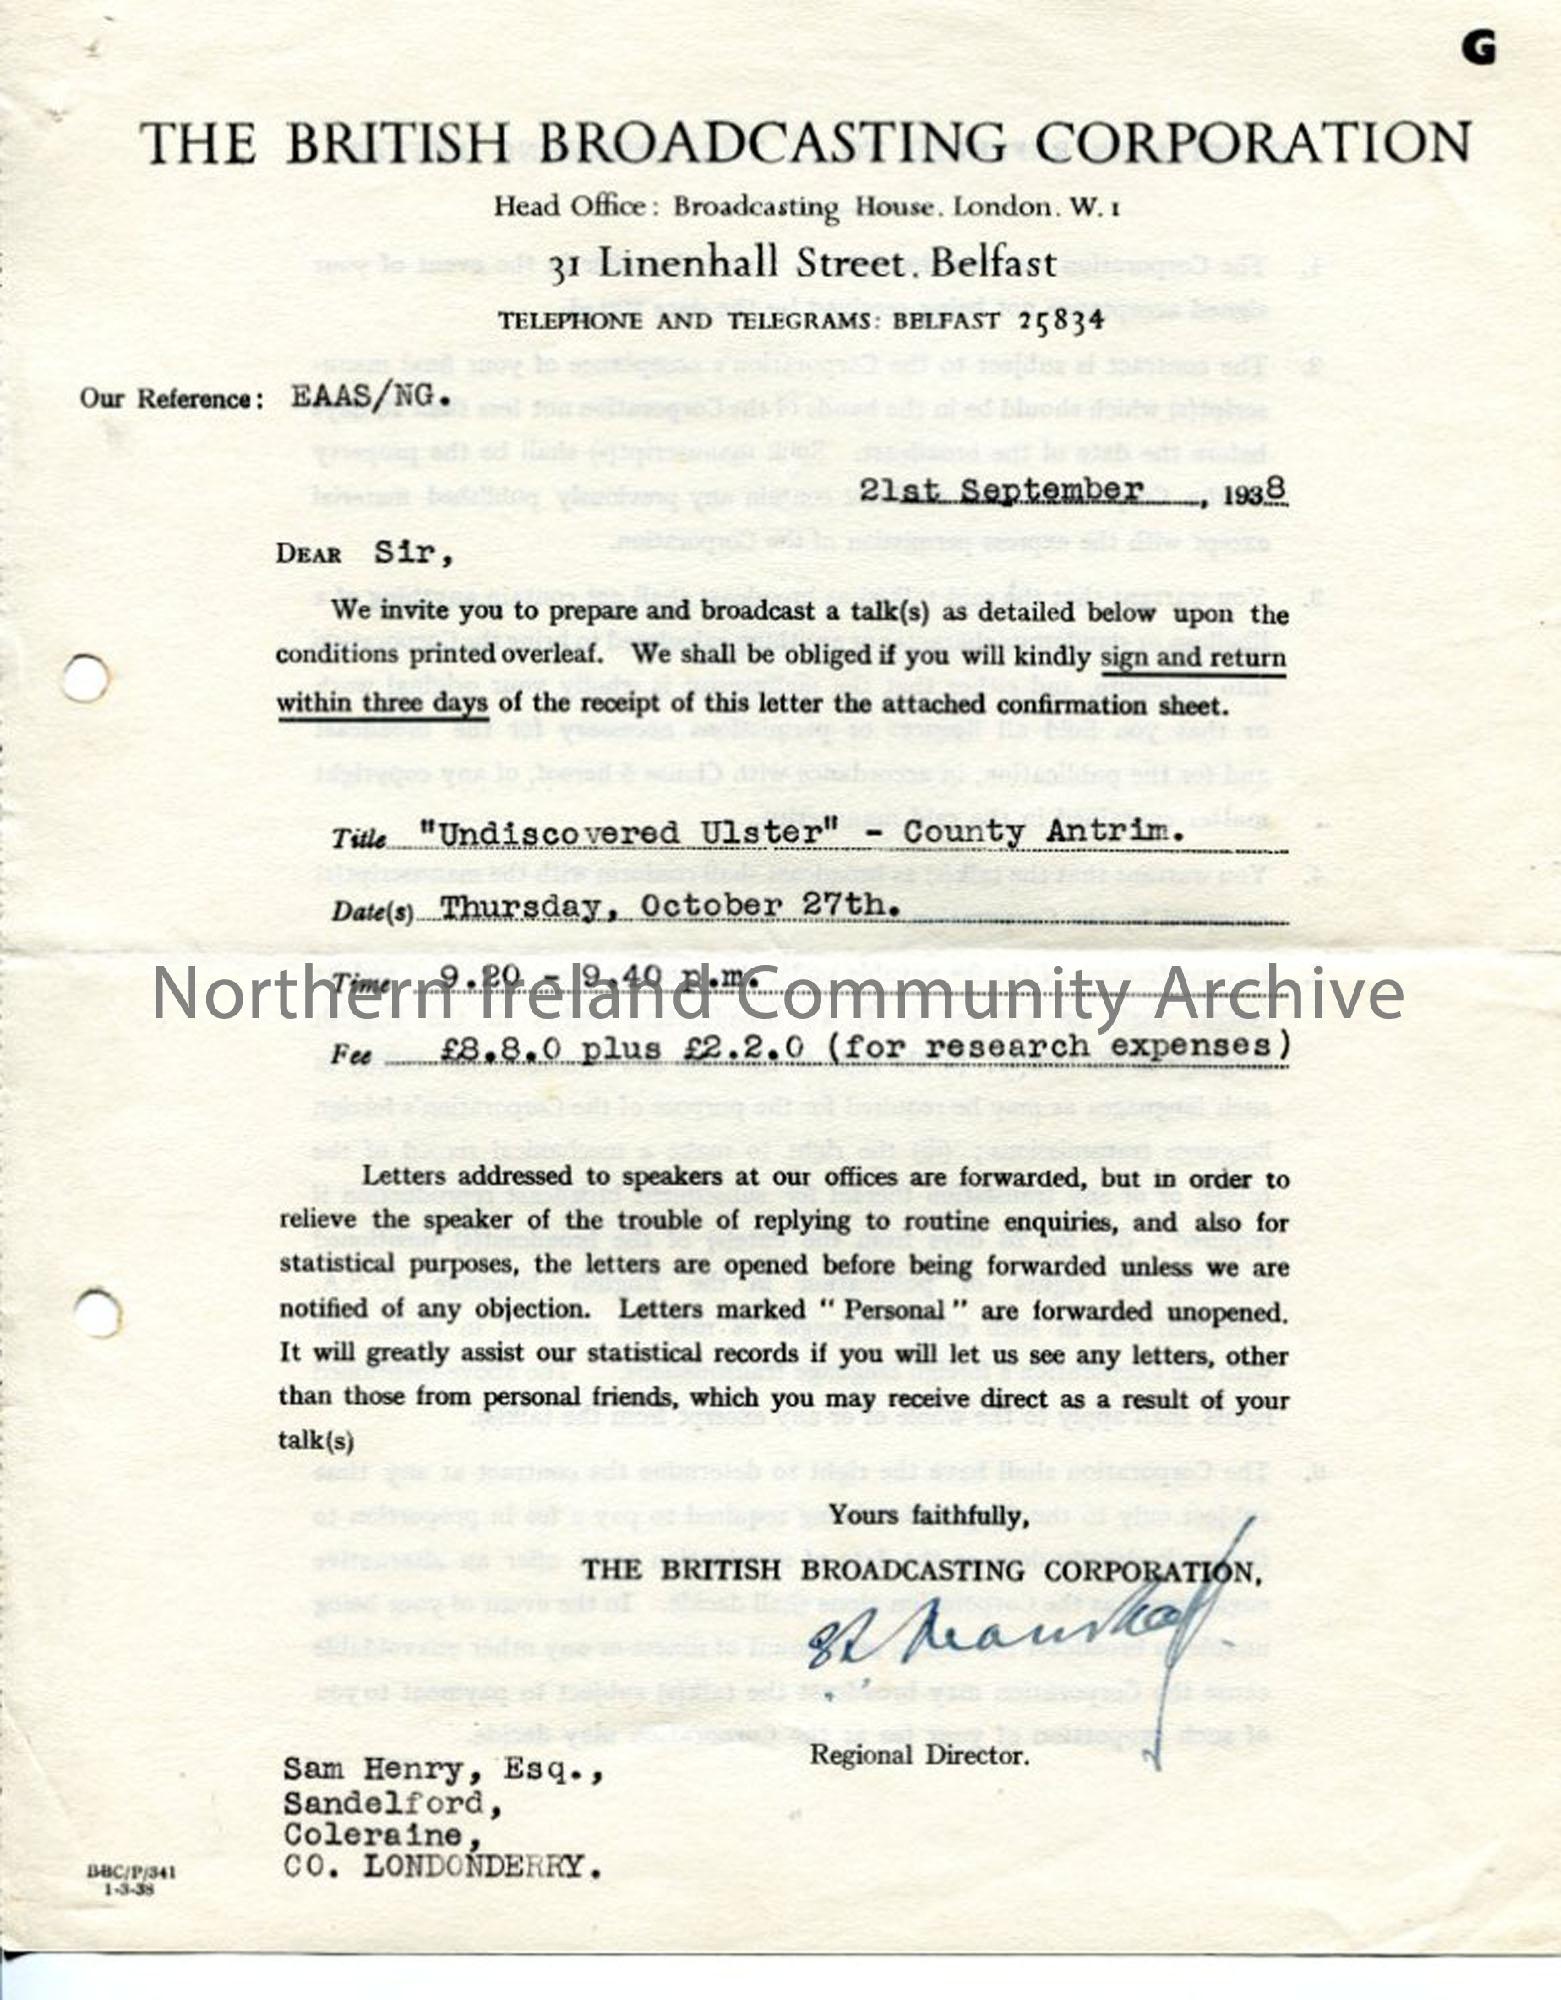 Formal Agreement from the BBC, dated 21.9.1938